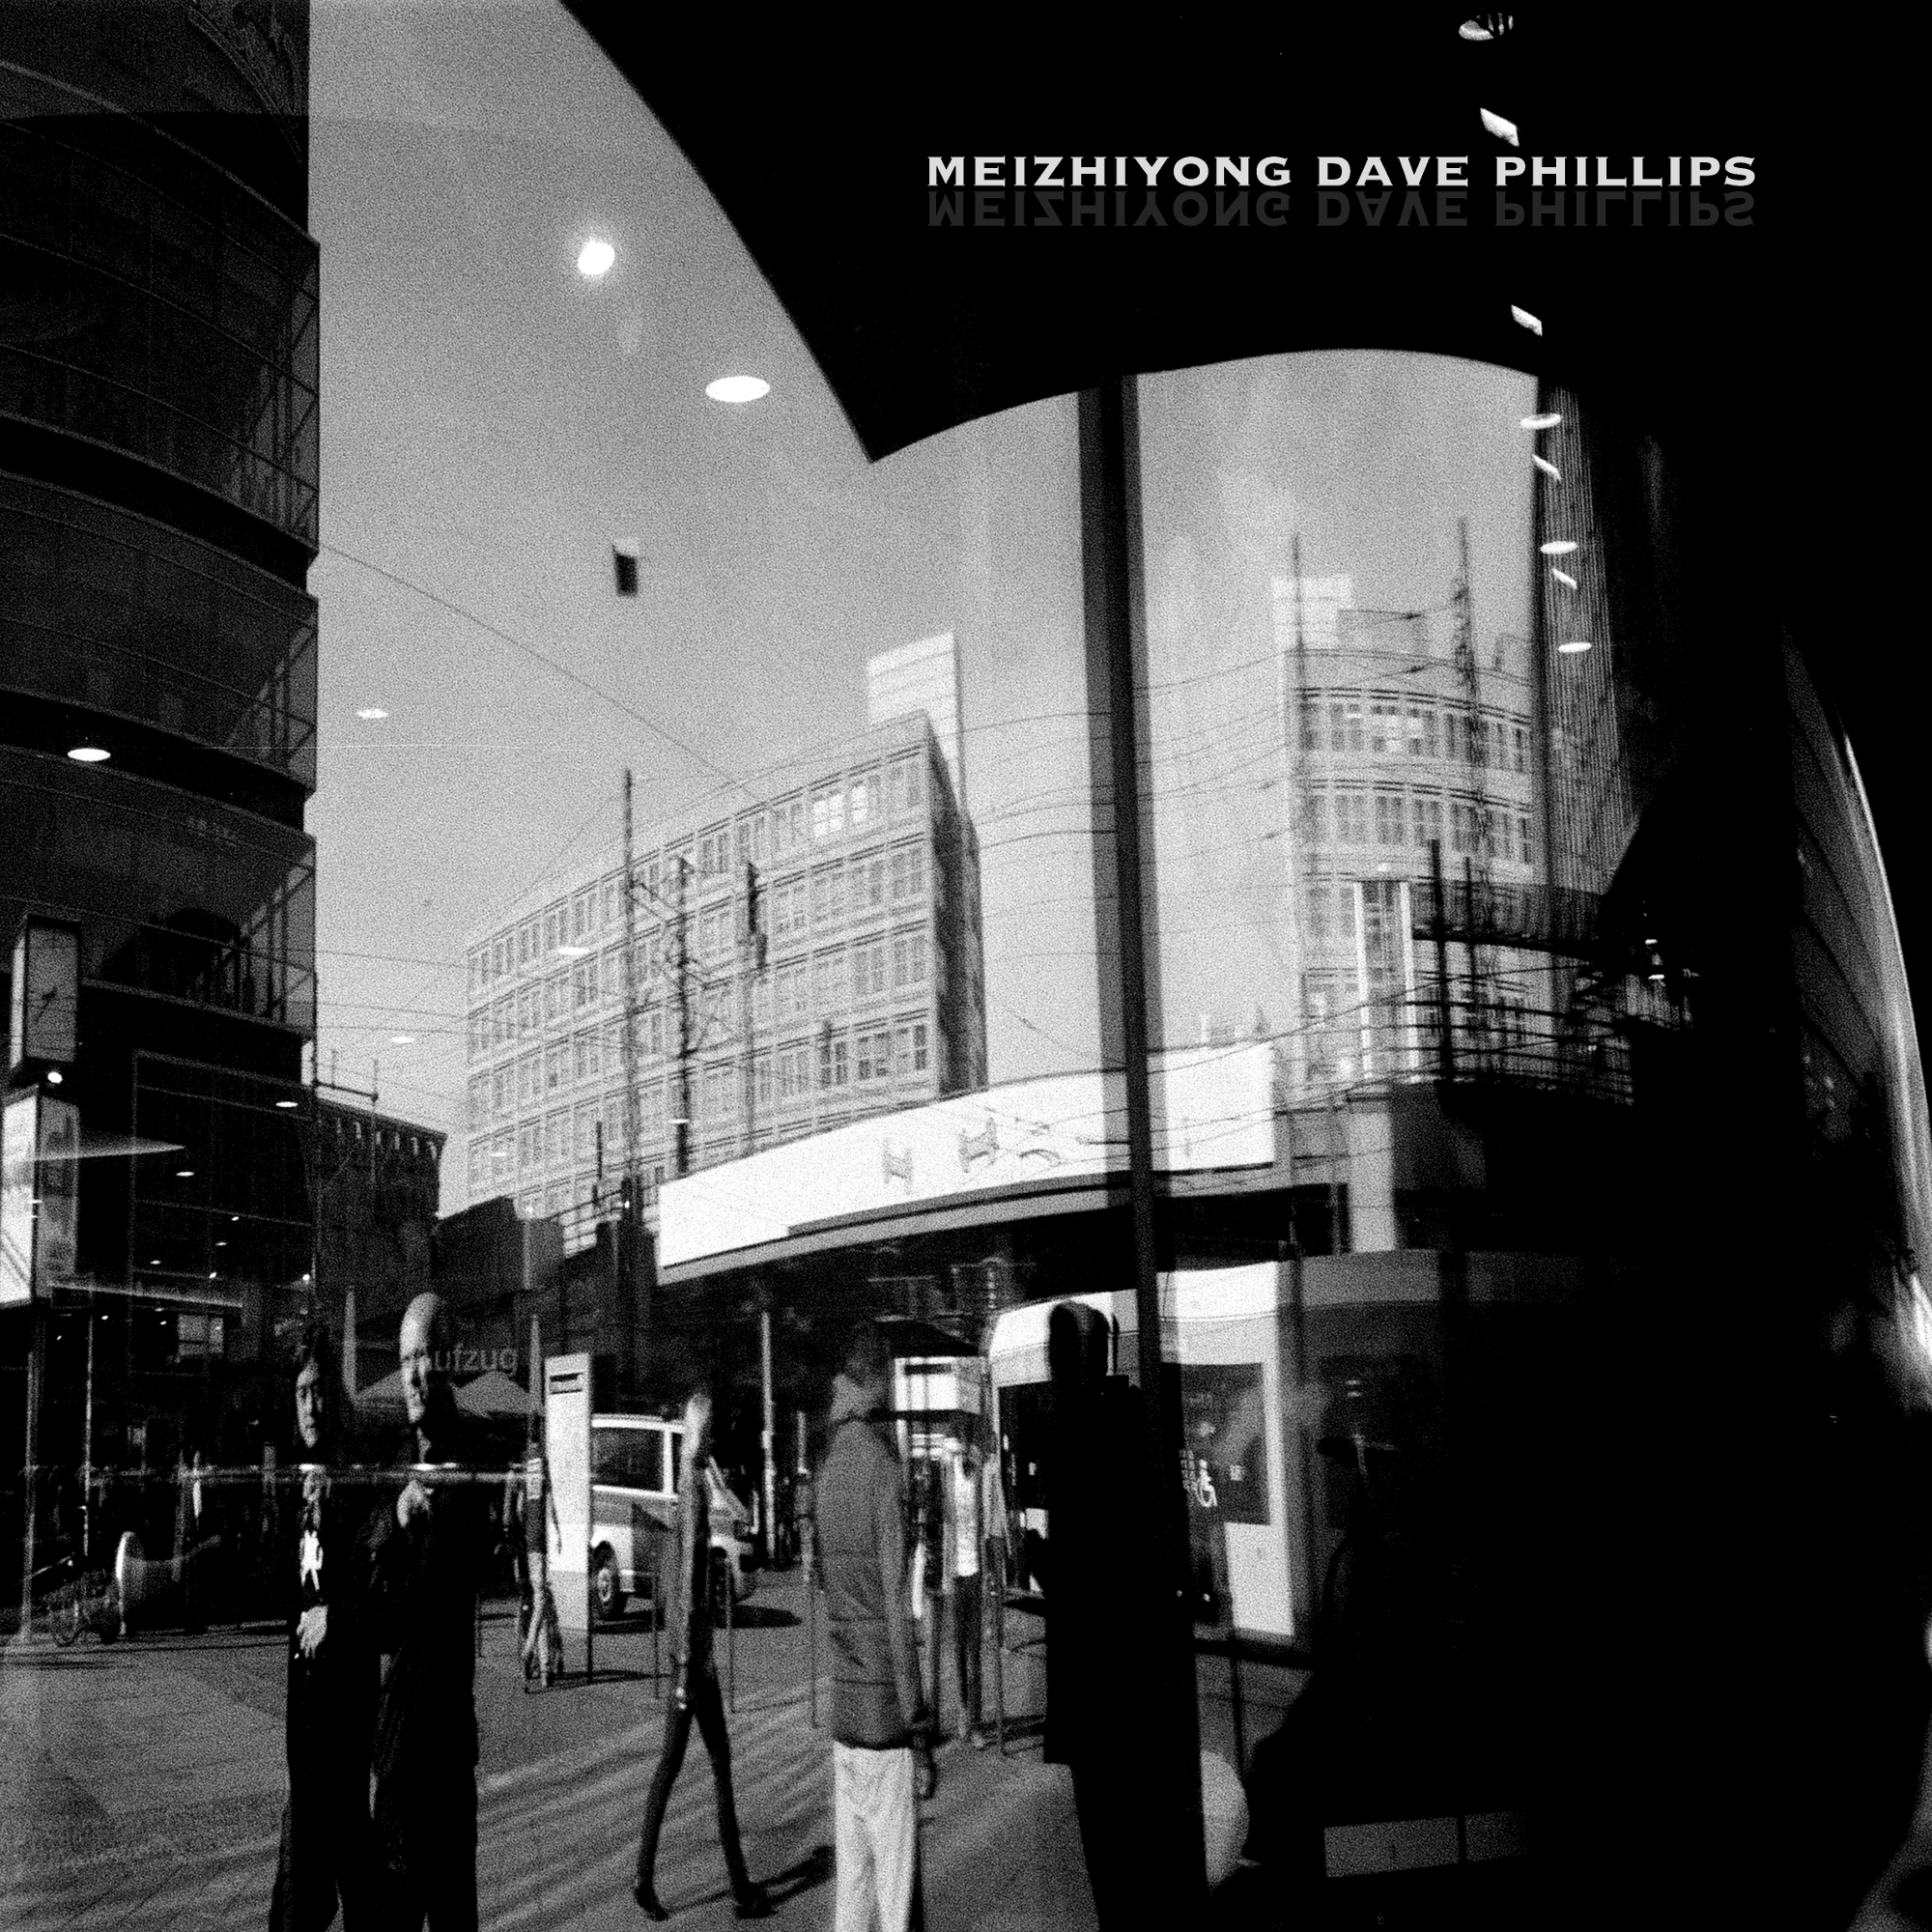 MeiZhiyong Dave Phillips reviewed